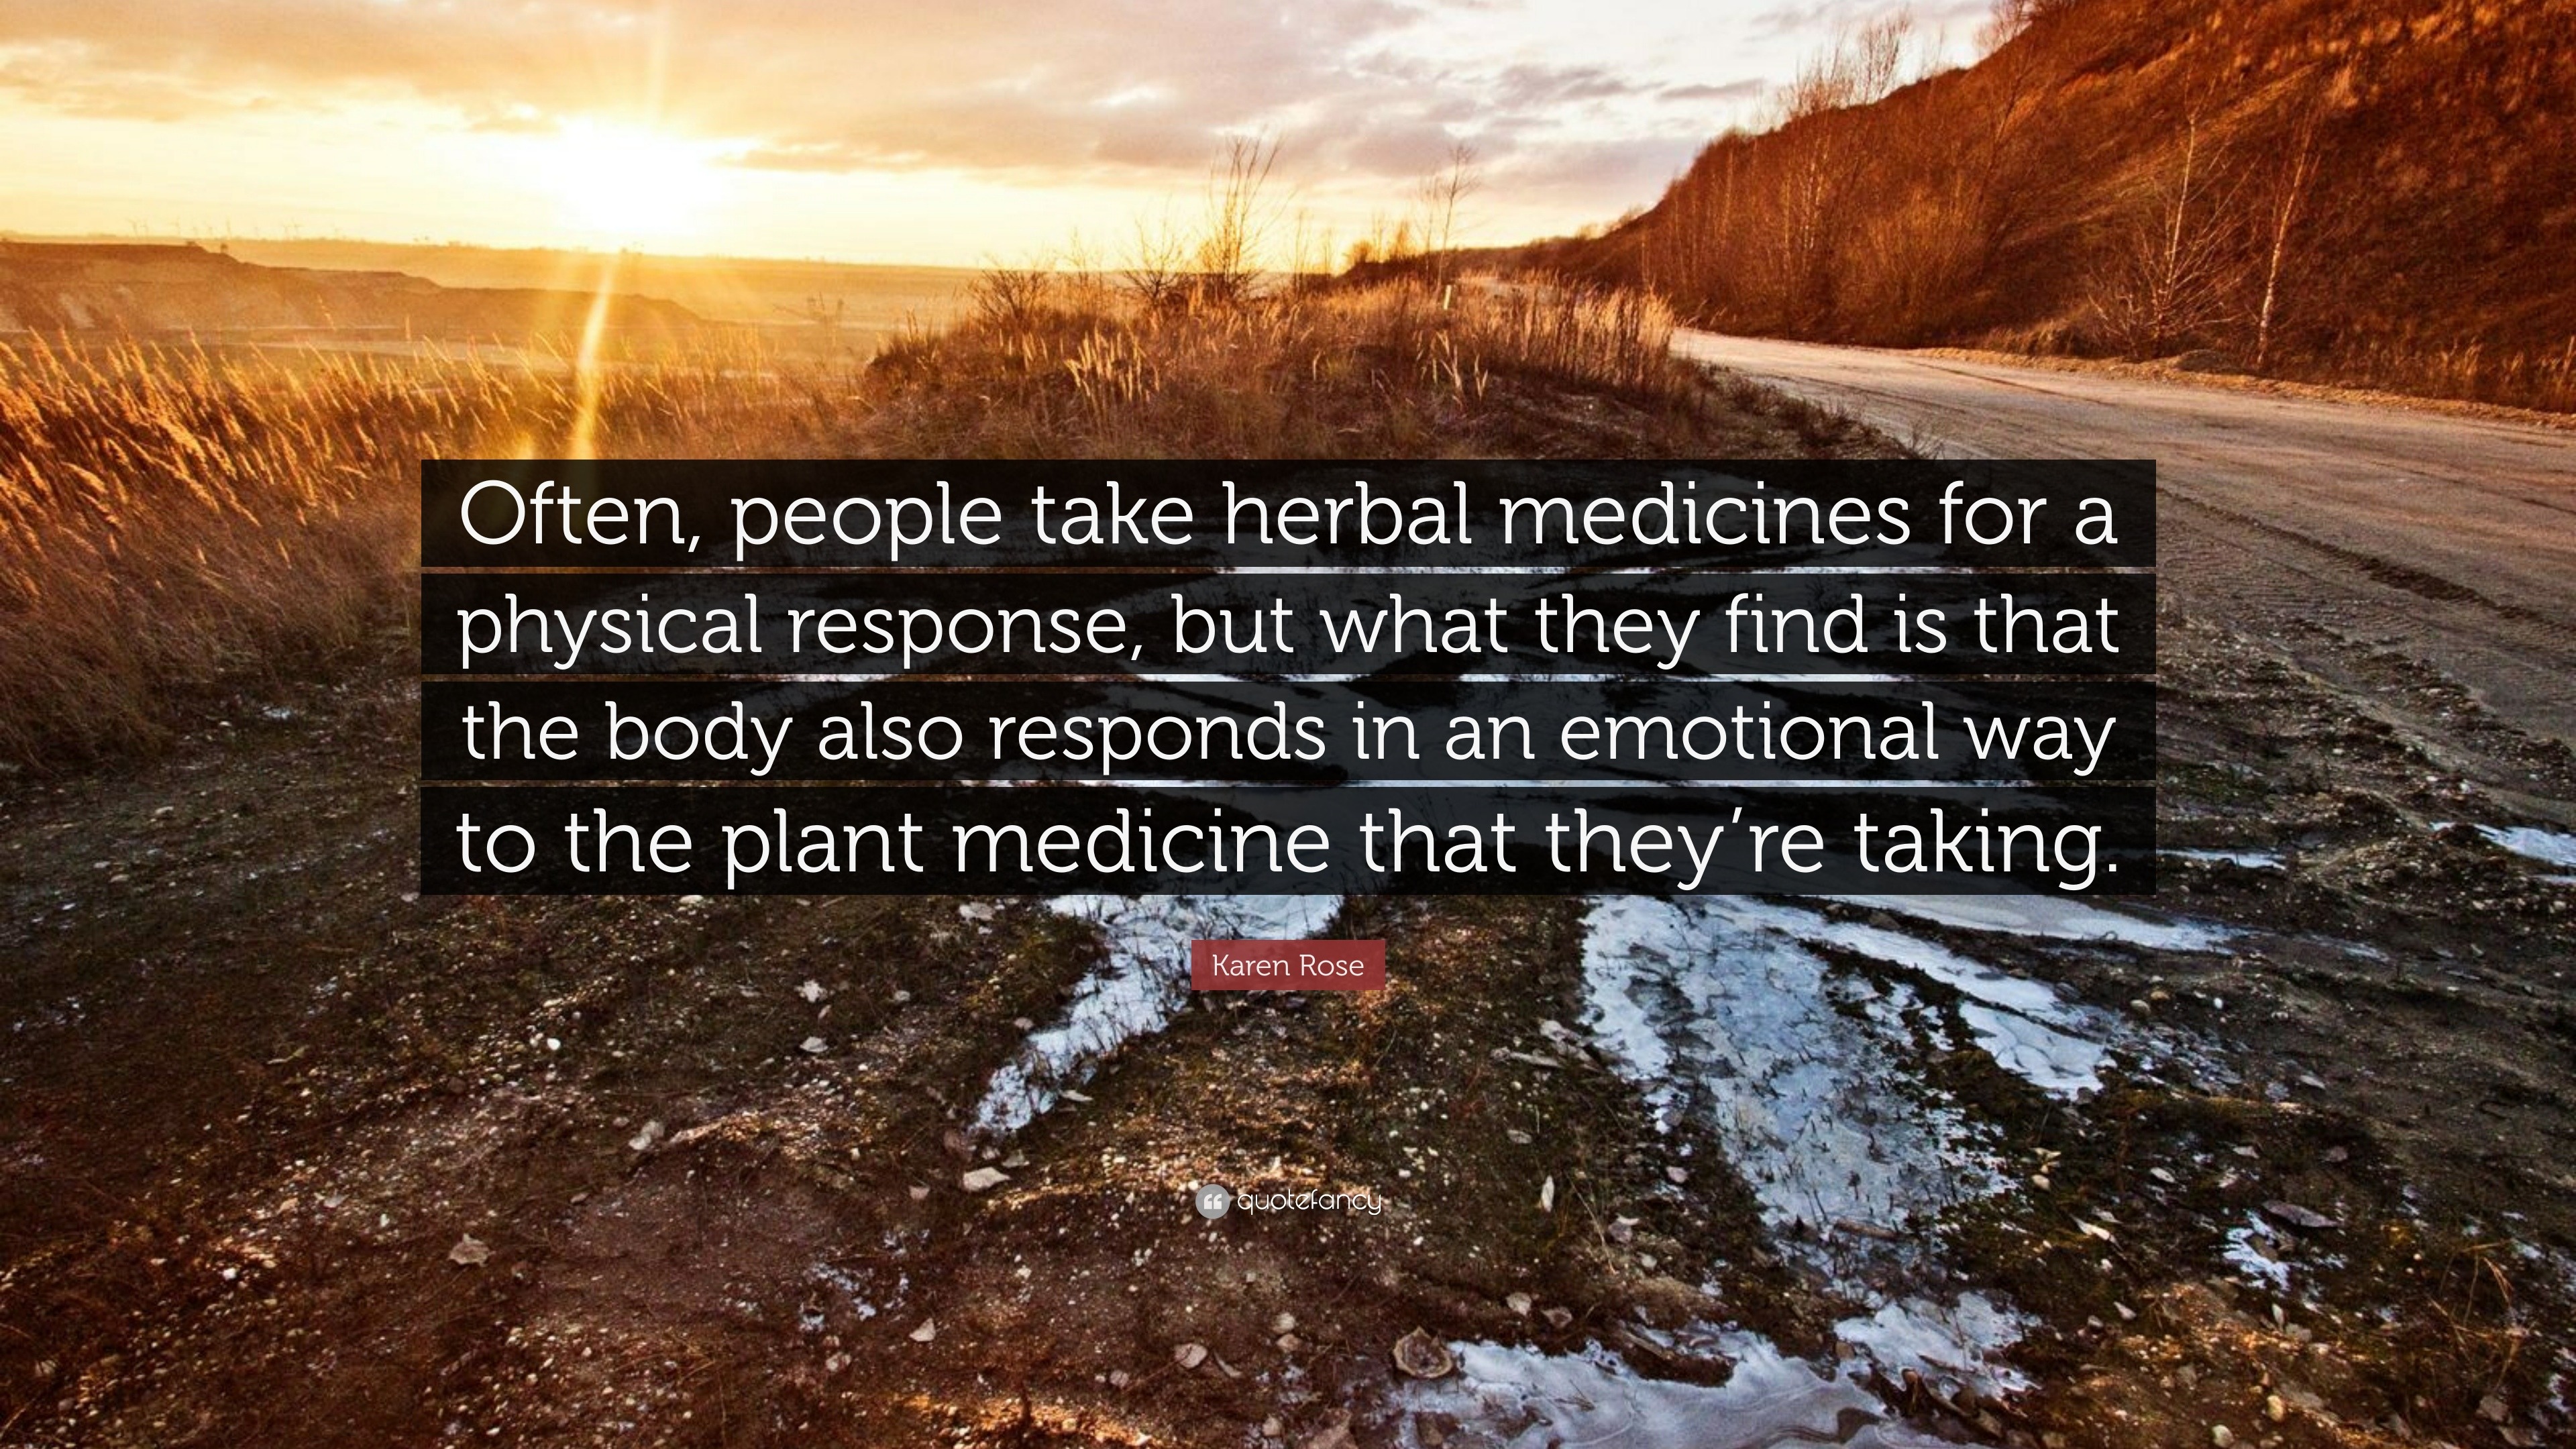 Karen Rose Quote: “Often, people take herbal medicines for a physical response, but what they is that the body also responds in an emo...”